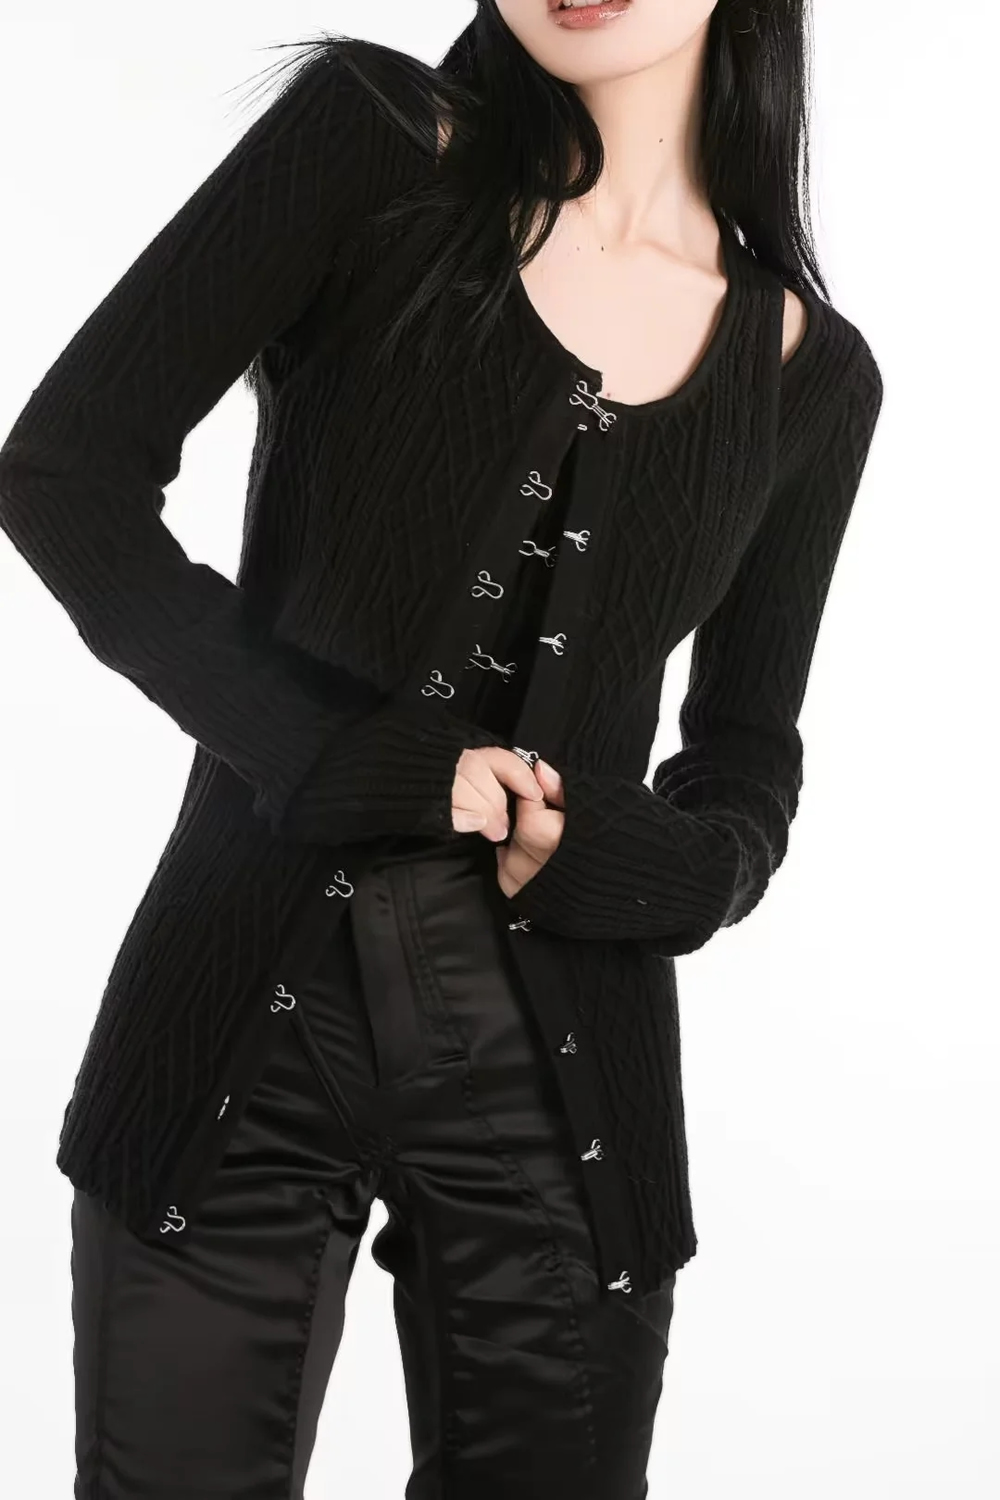 Fashion Black Two-piece Blended Diamond Knit Cardigan Suspender,Sweater